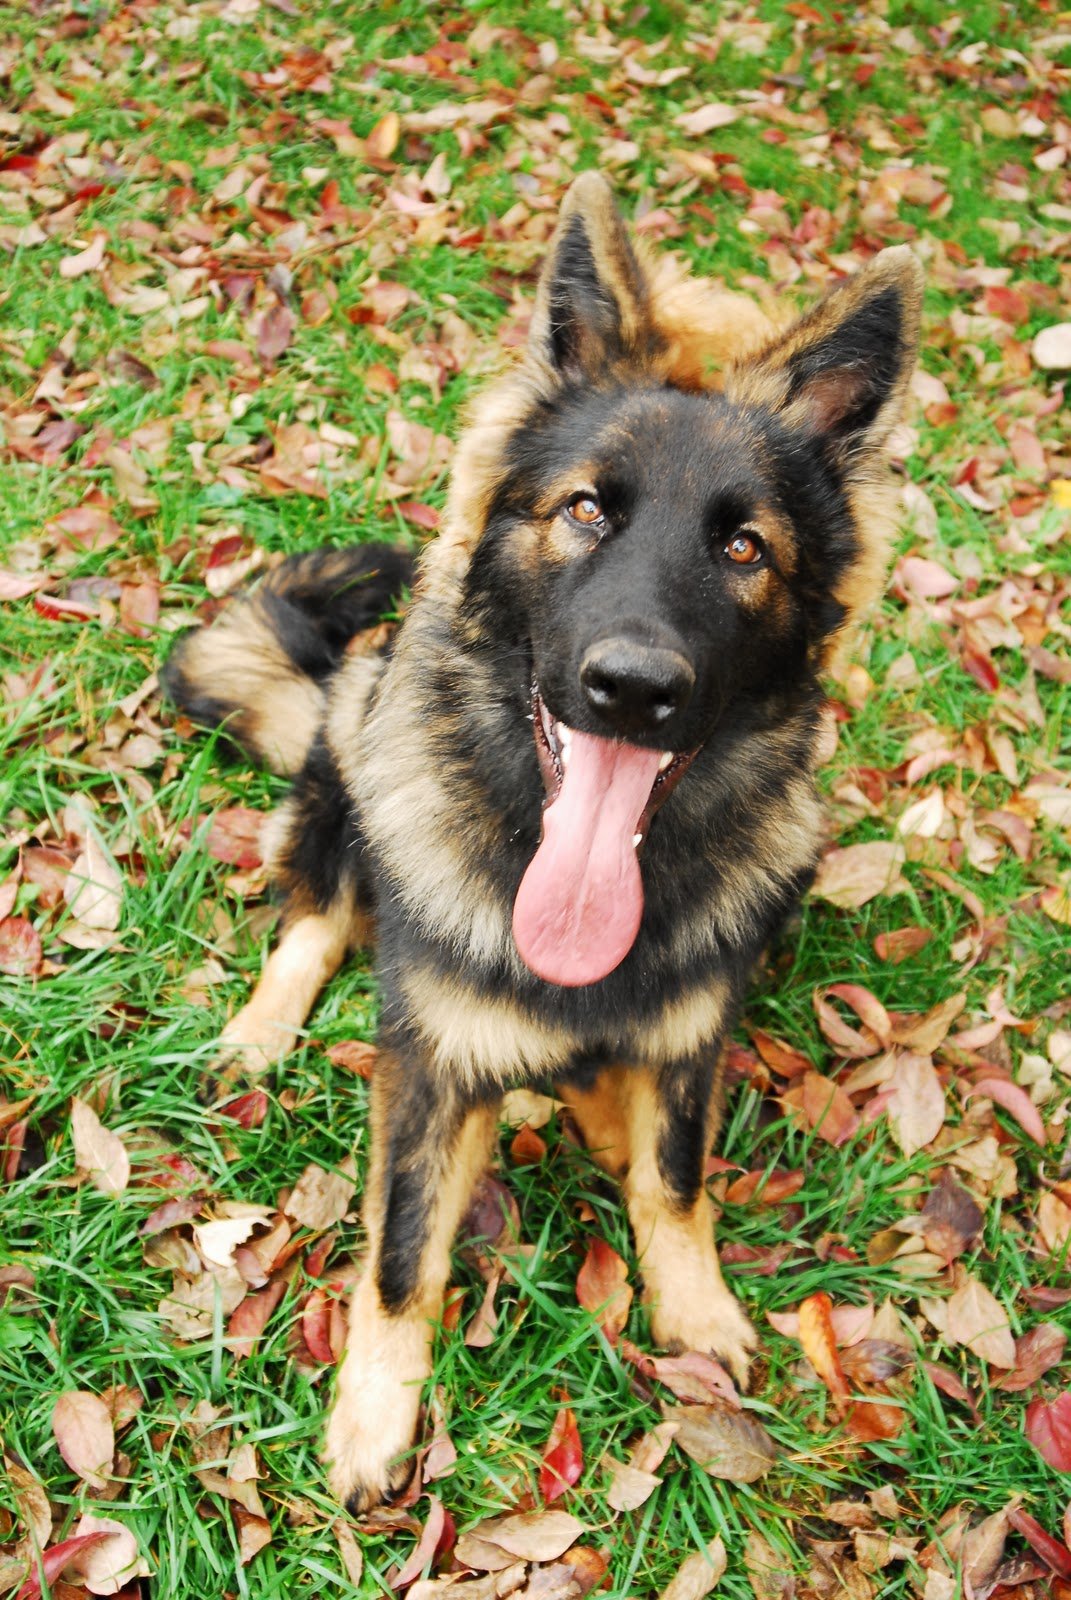 Does your GSD have a black spot on their tongue?